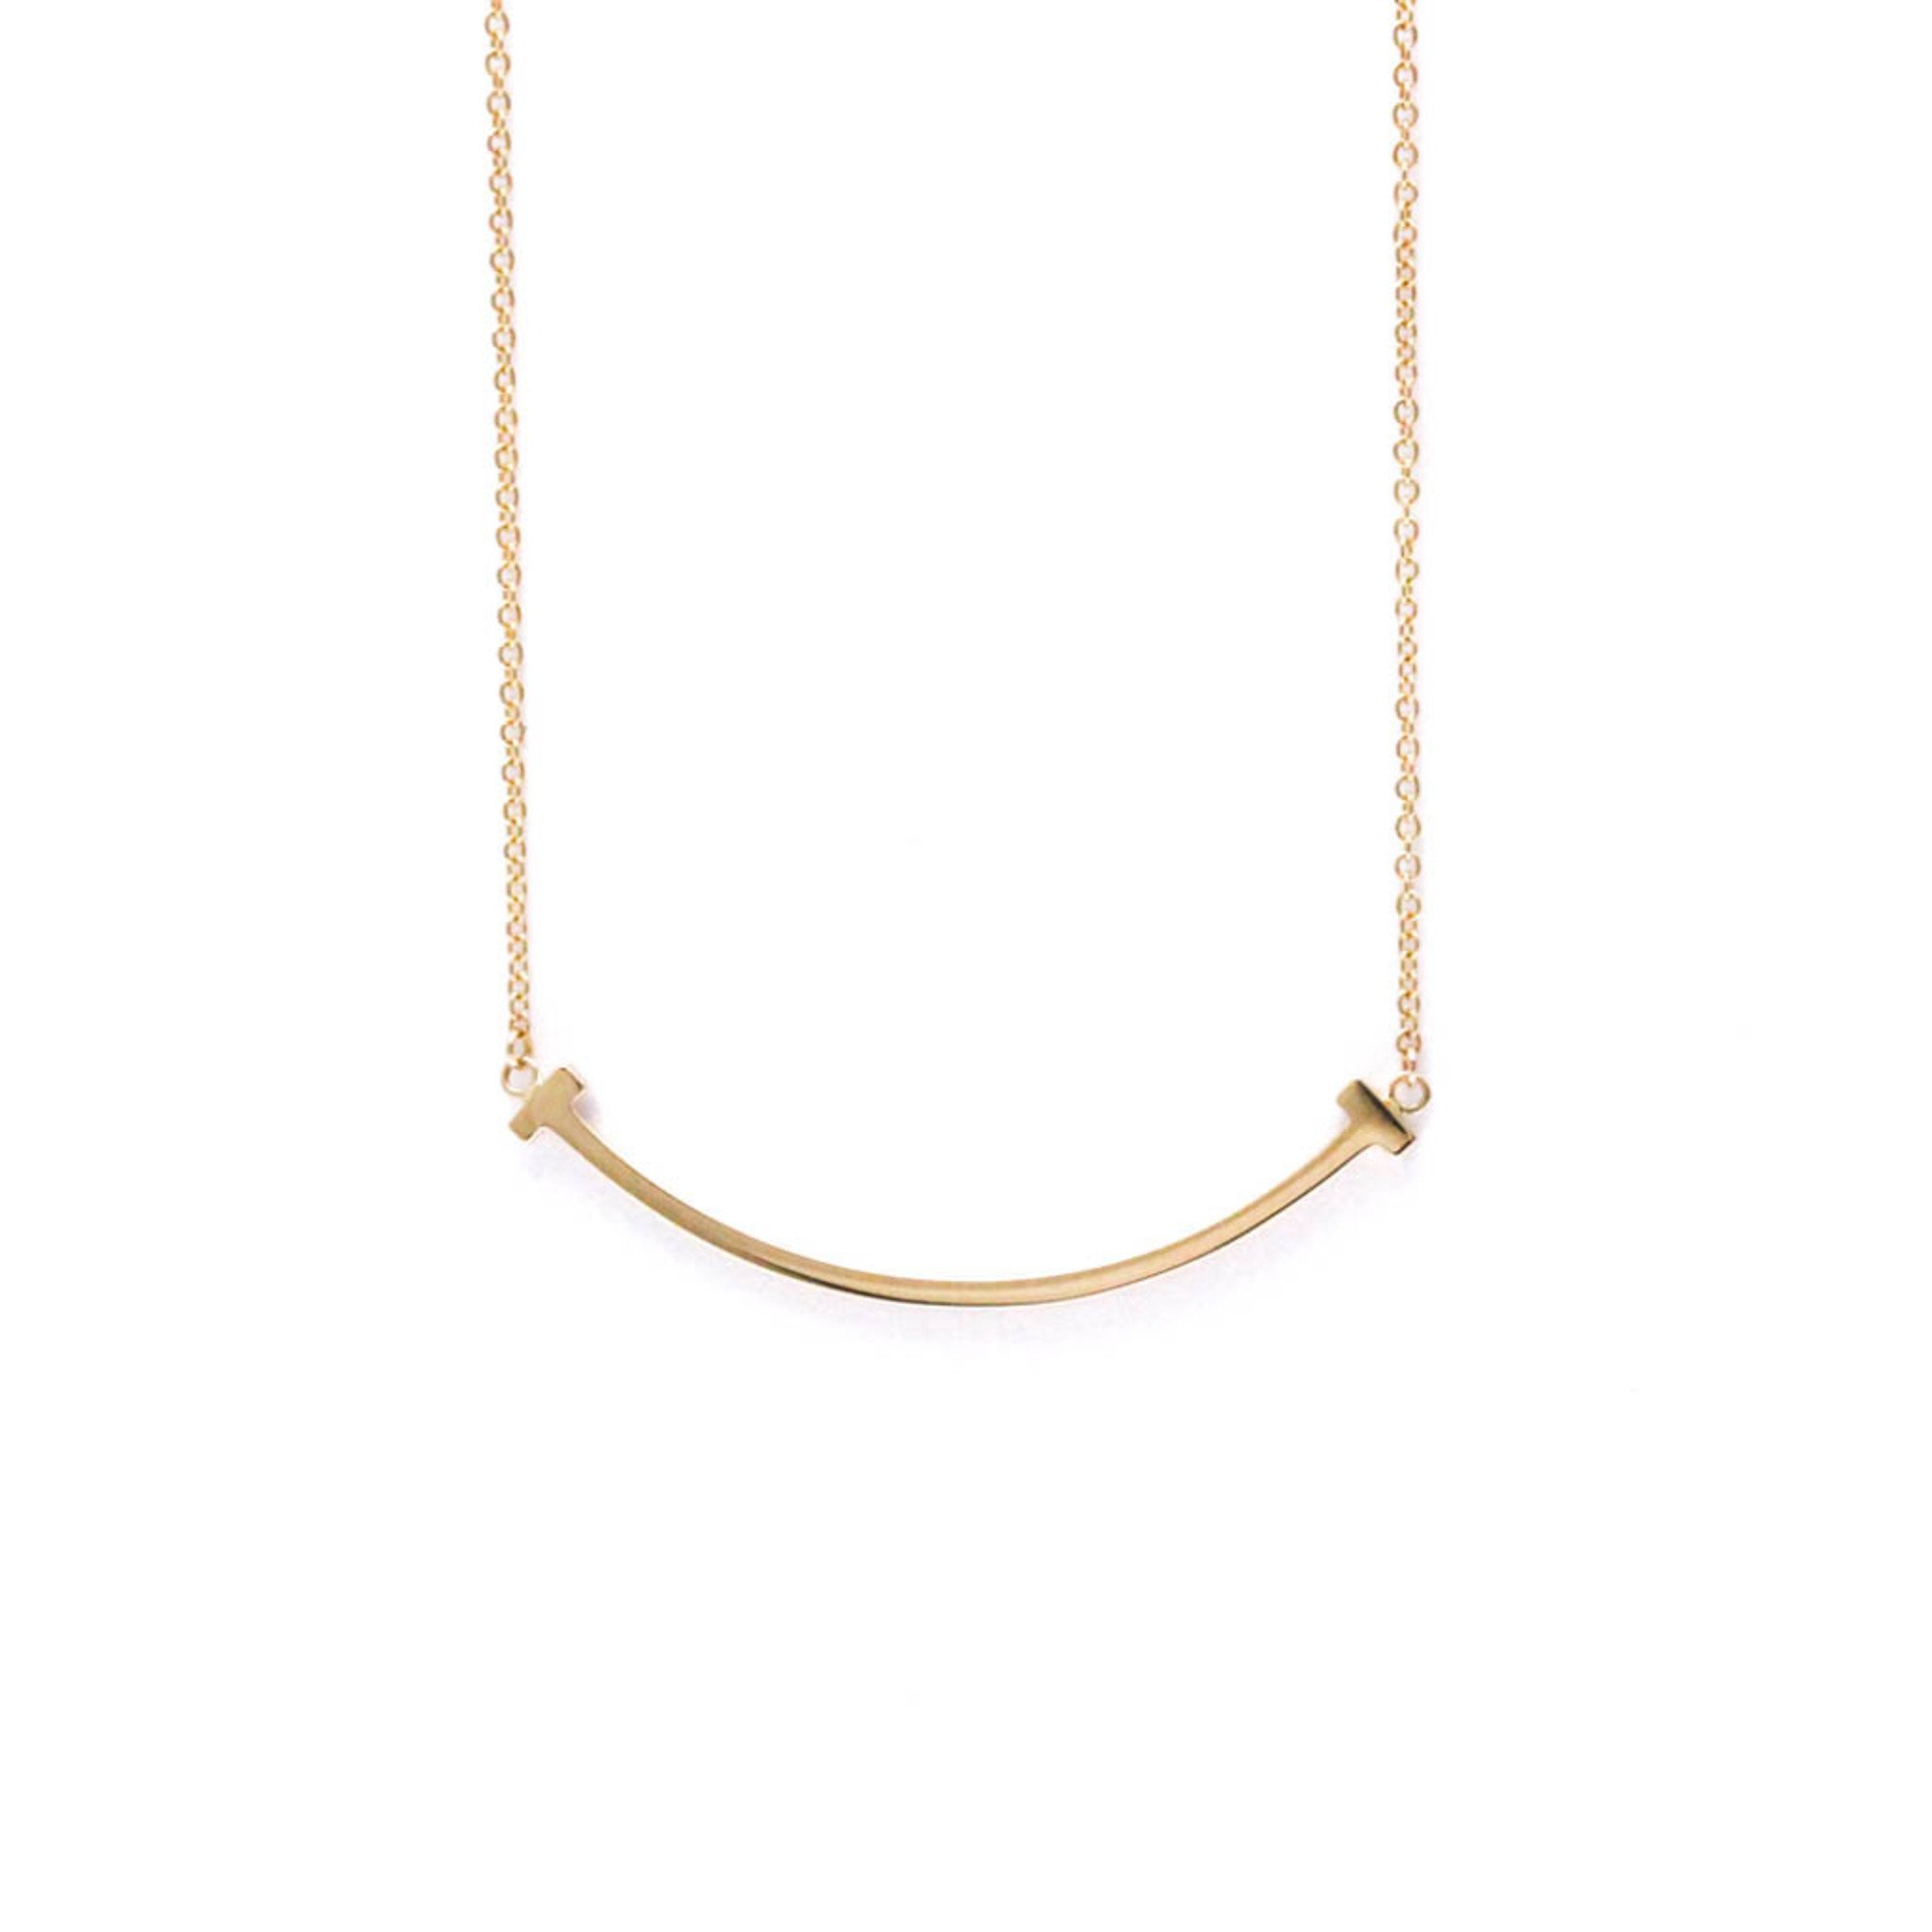 Tiffany Smile Pink Gold (18K) No Stone Women's Fashion Pendant Necklace (Pink Gold)